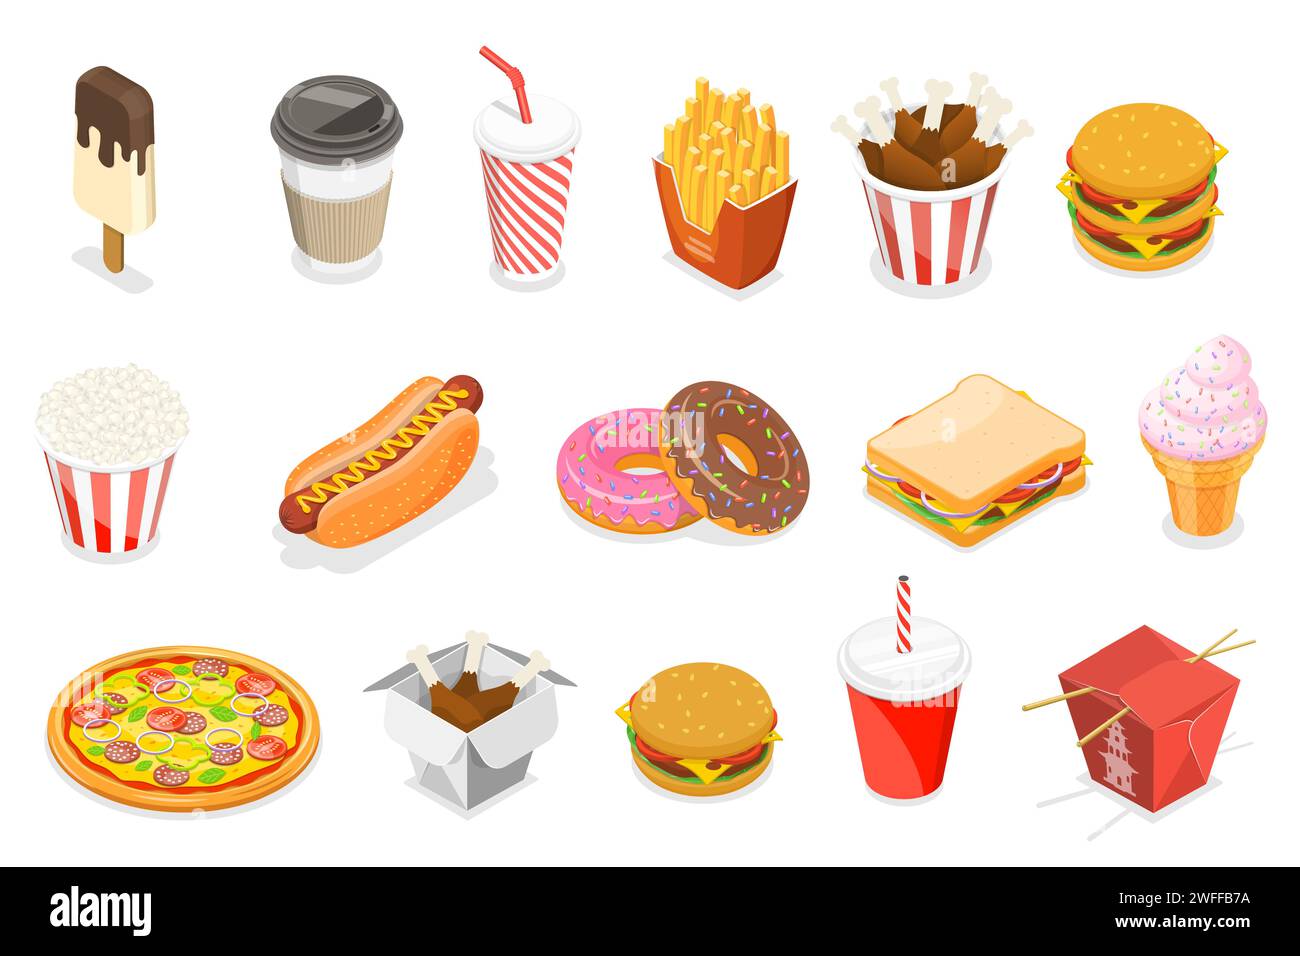 3D Isometric Flat Vector Icon Set as Hot Dog, Donut, Ice Cream, Pizza, French Fries, Coffee, Soda, Chicken Bucket, Sandwich, Asian Food. Stock Vector